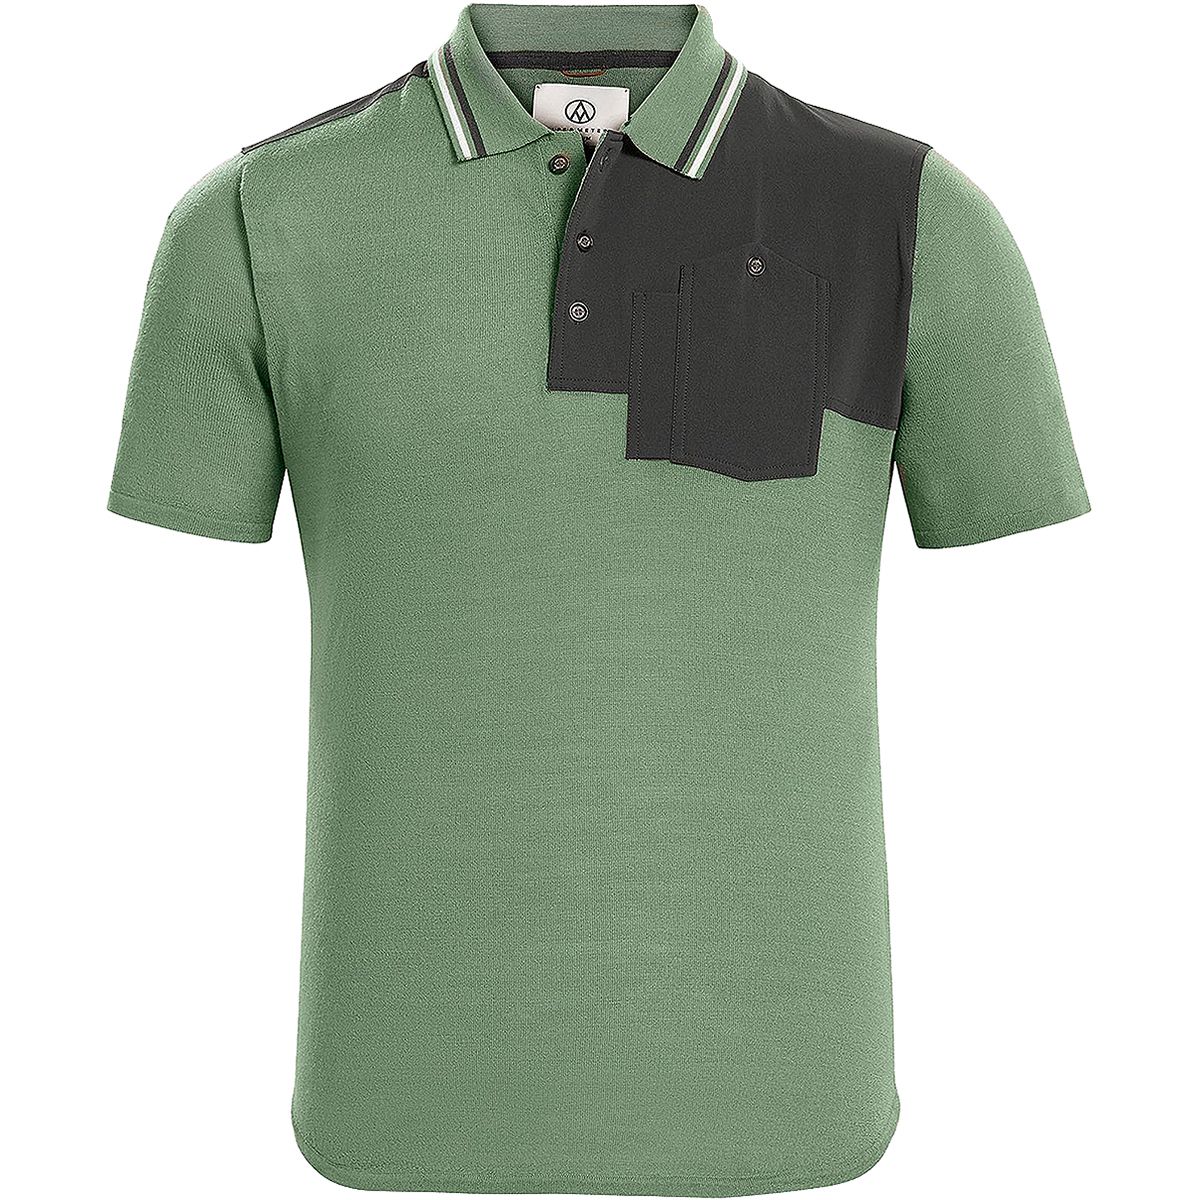 Alps & Meters Touring Polo Shirt - Men's